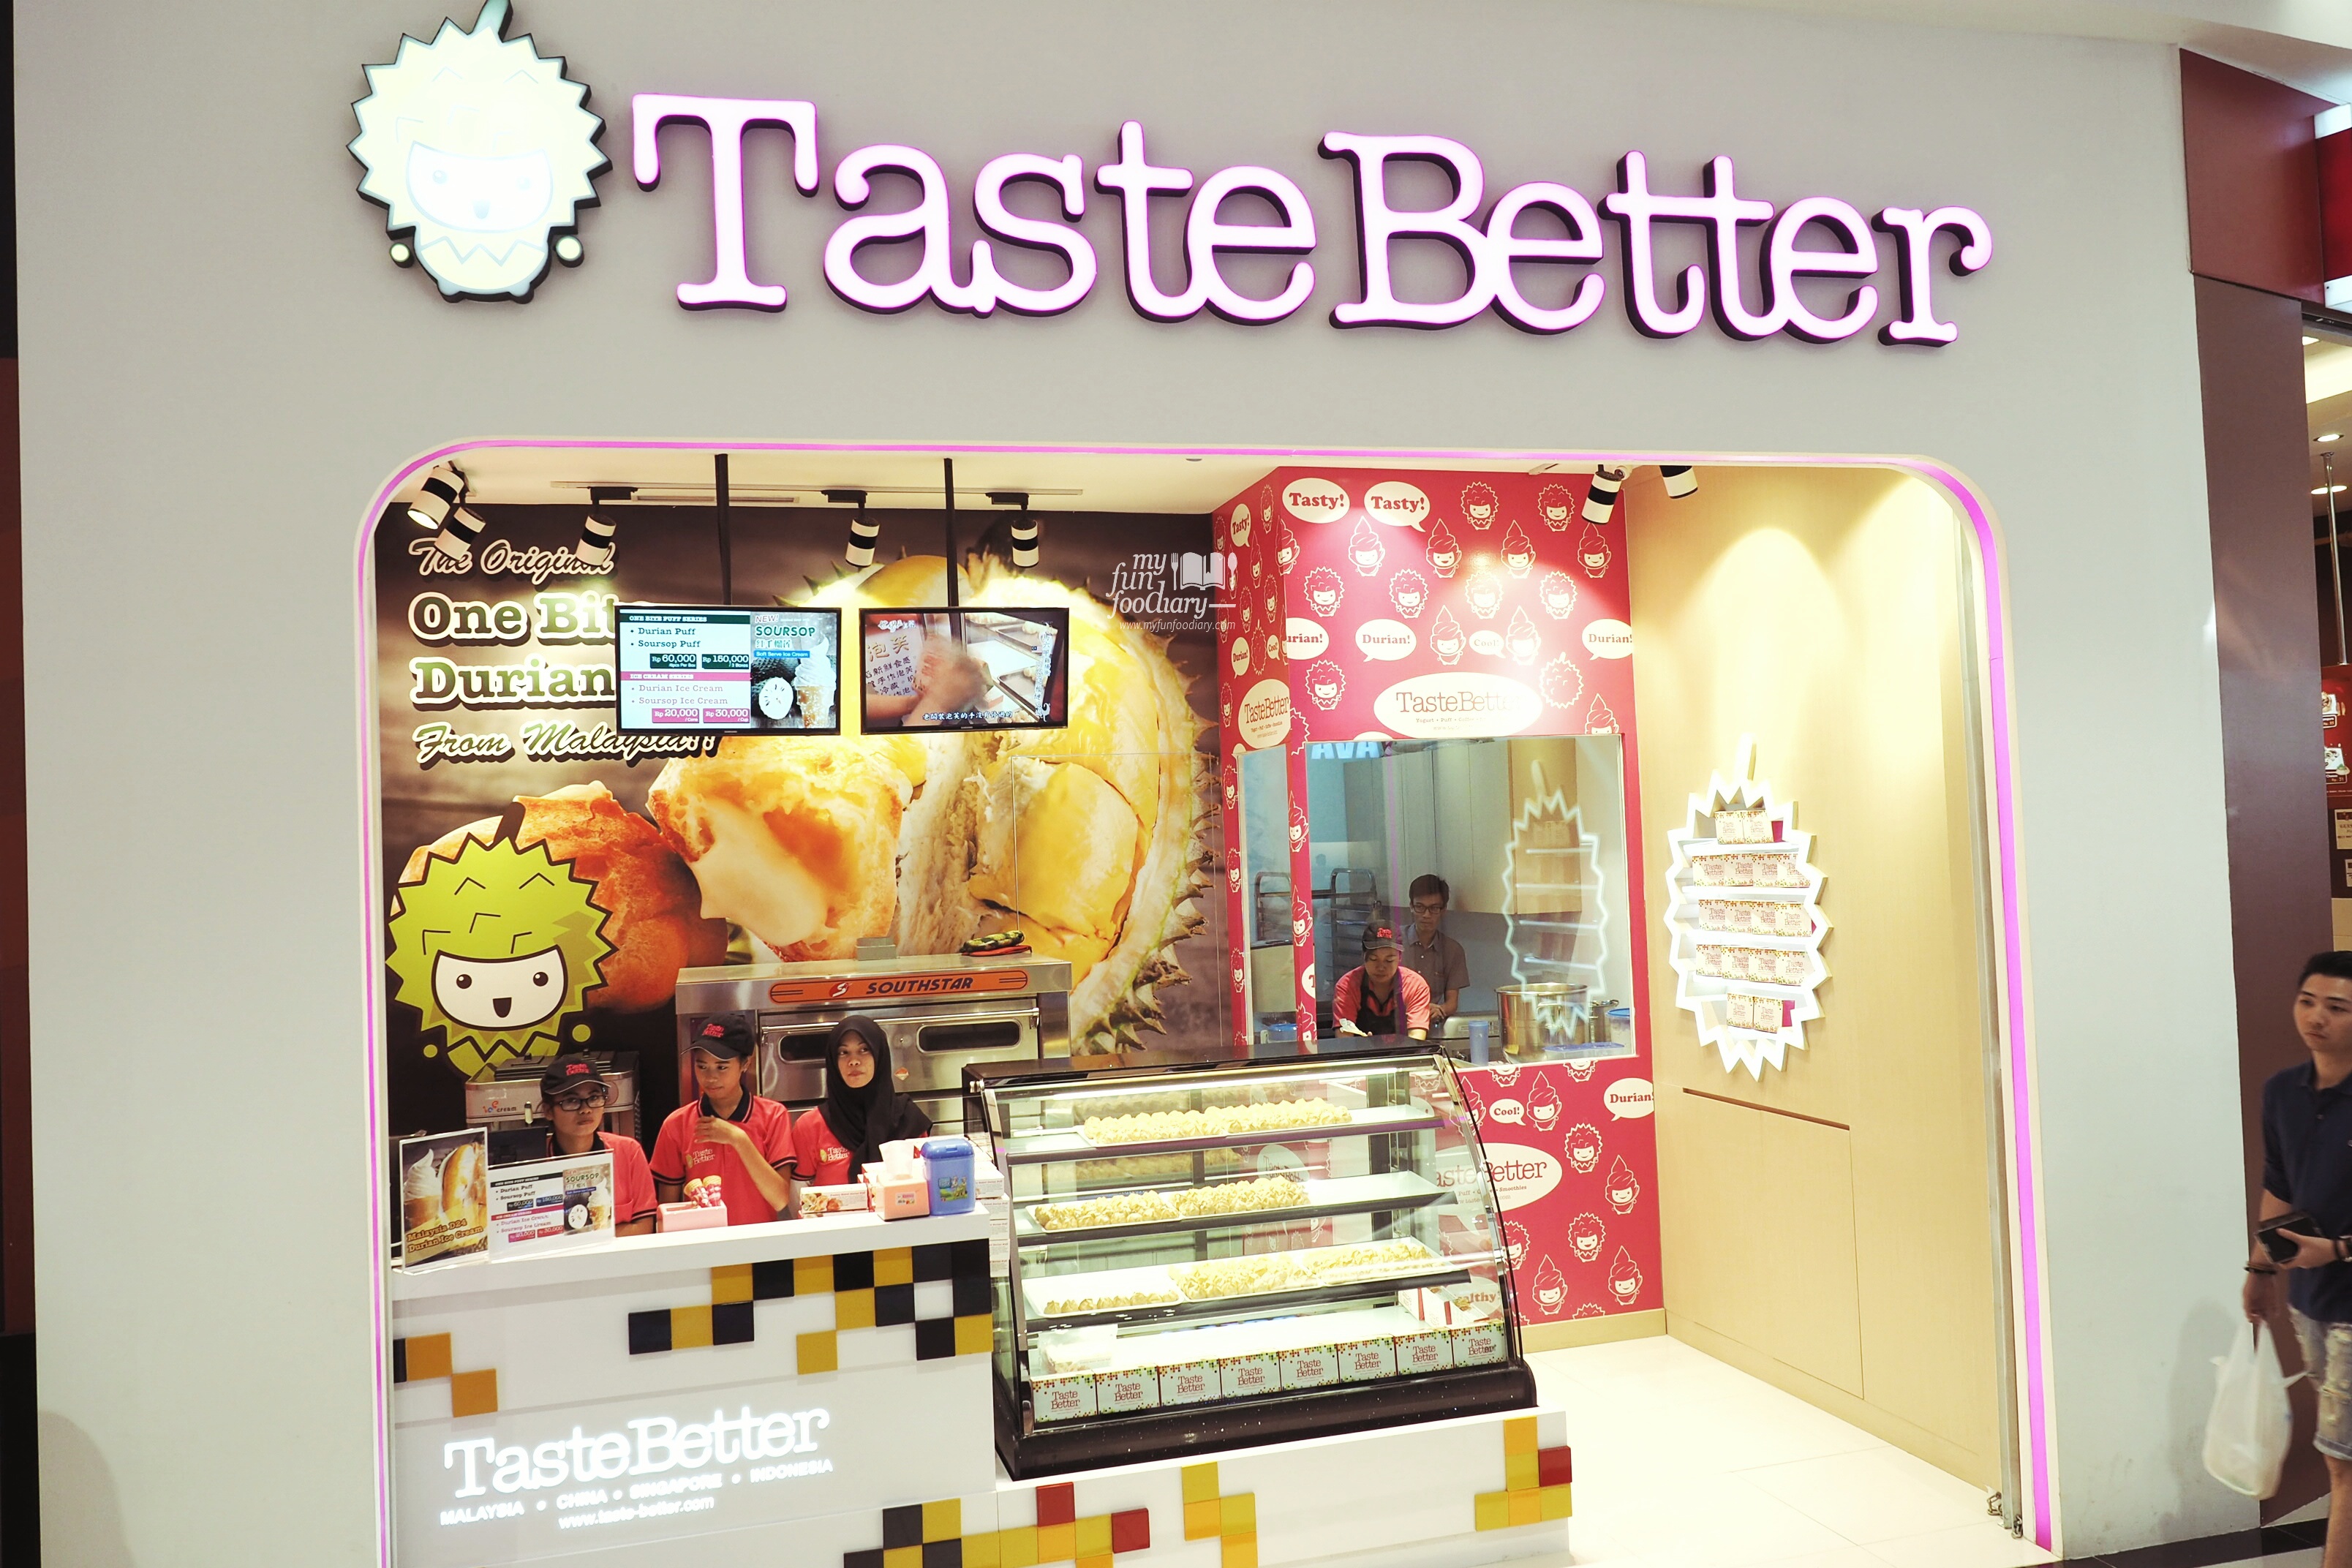 Taste Better Durian Puff at AEON Mall by Myfunfoodiary